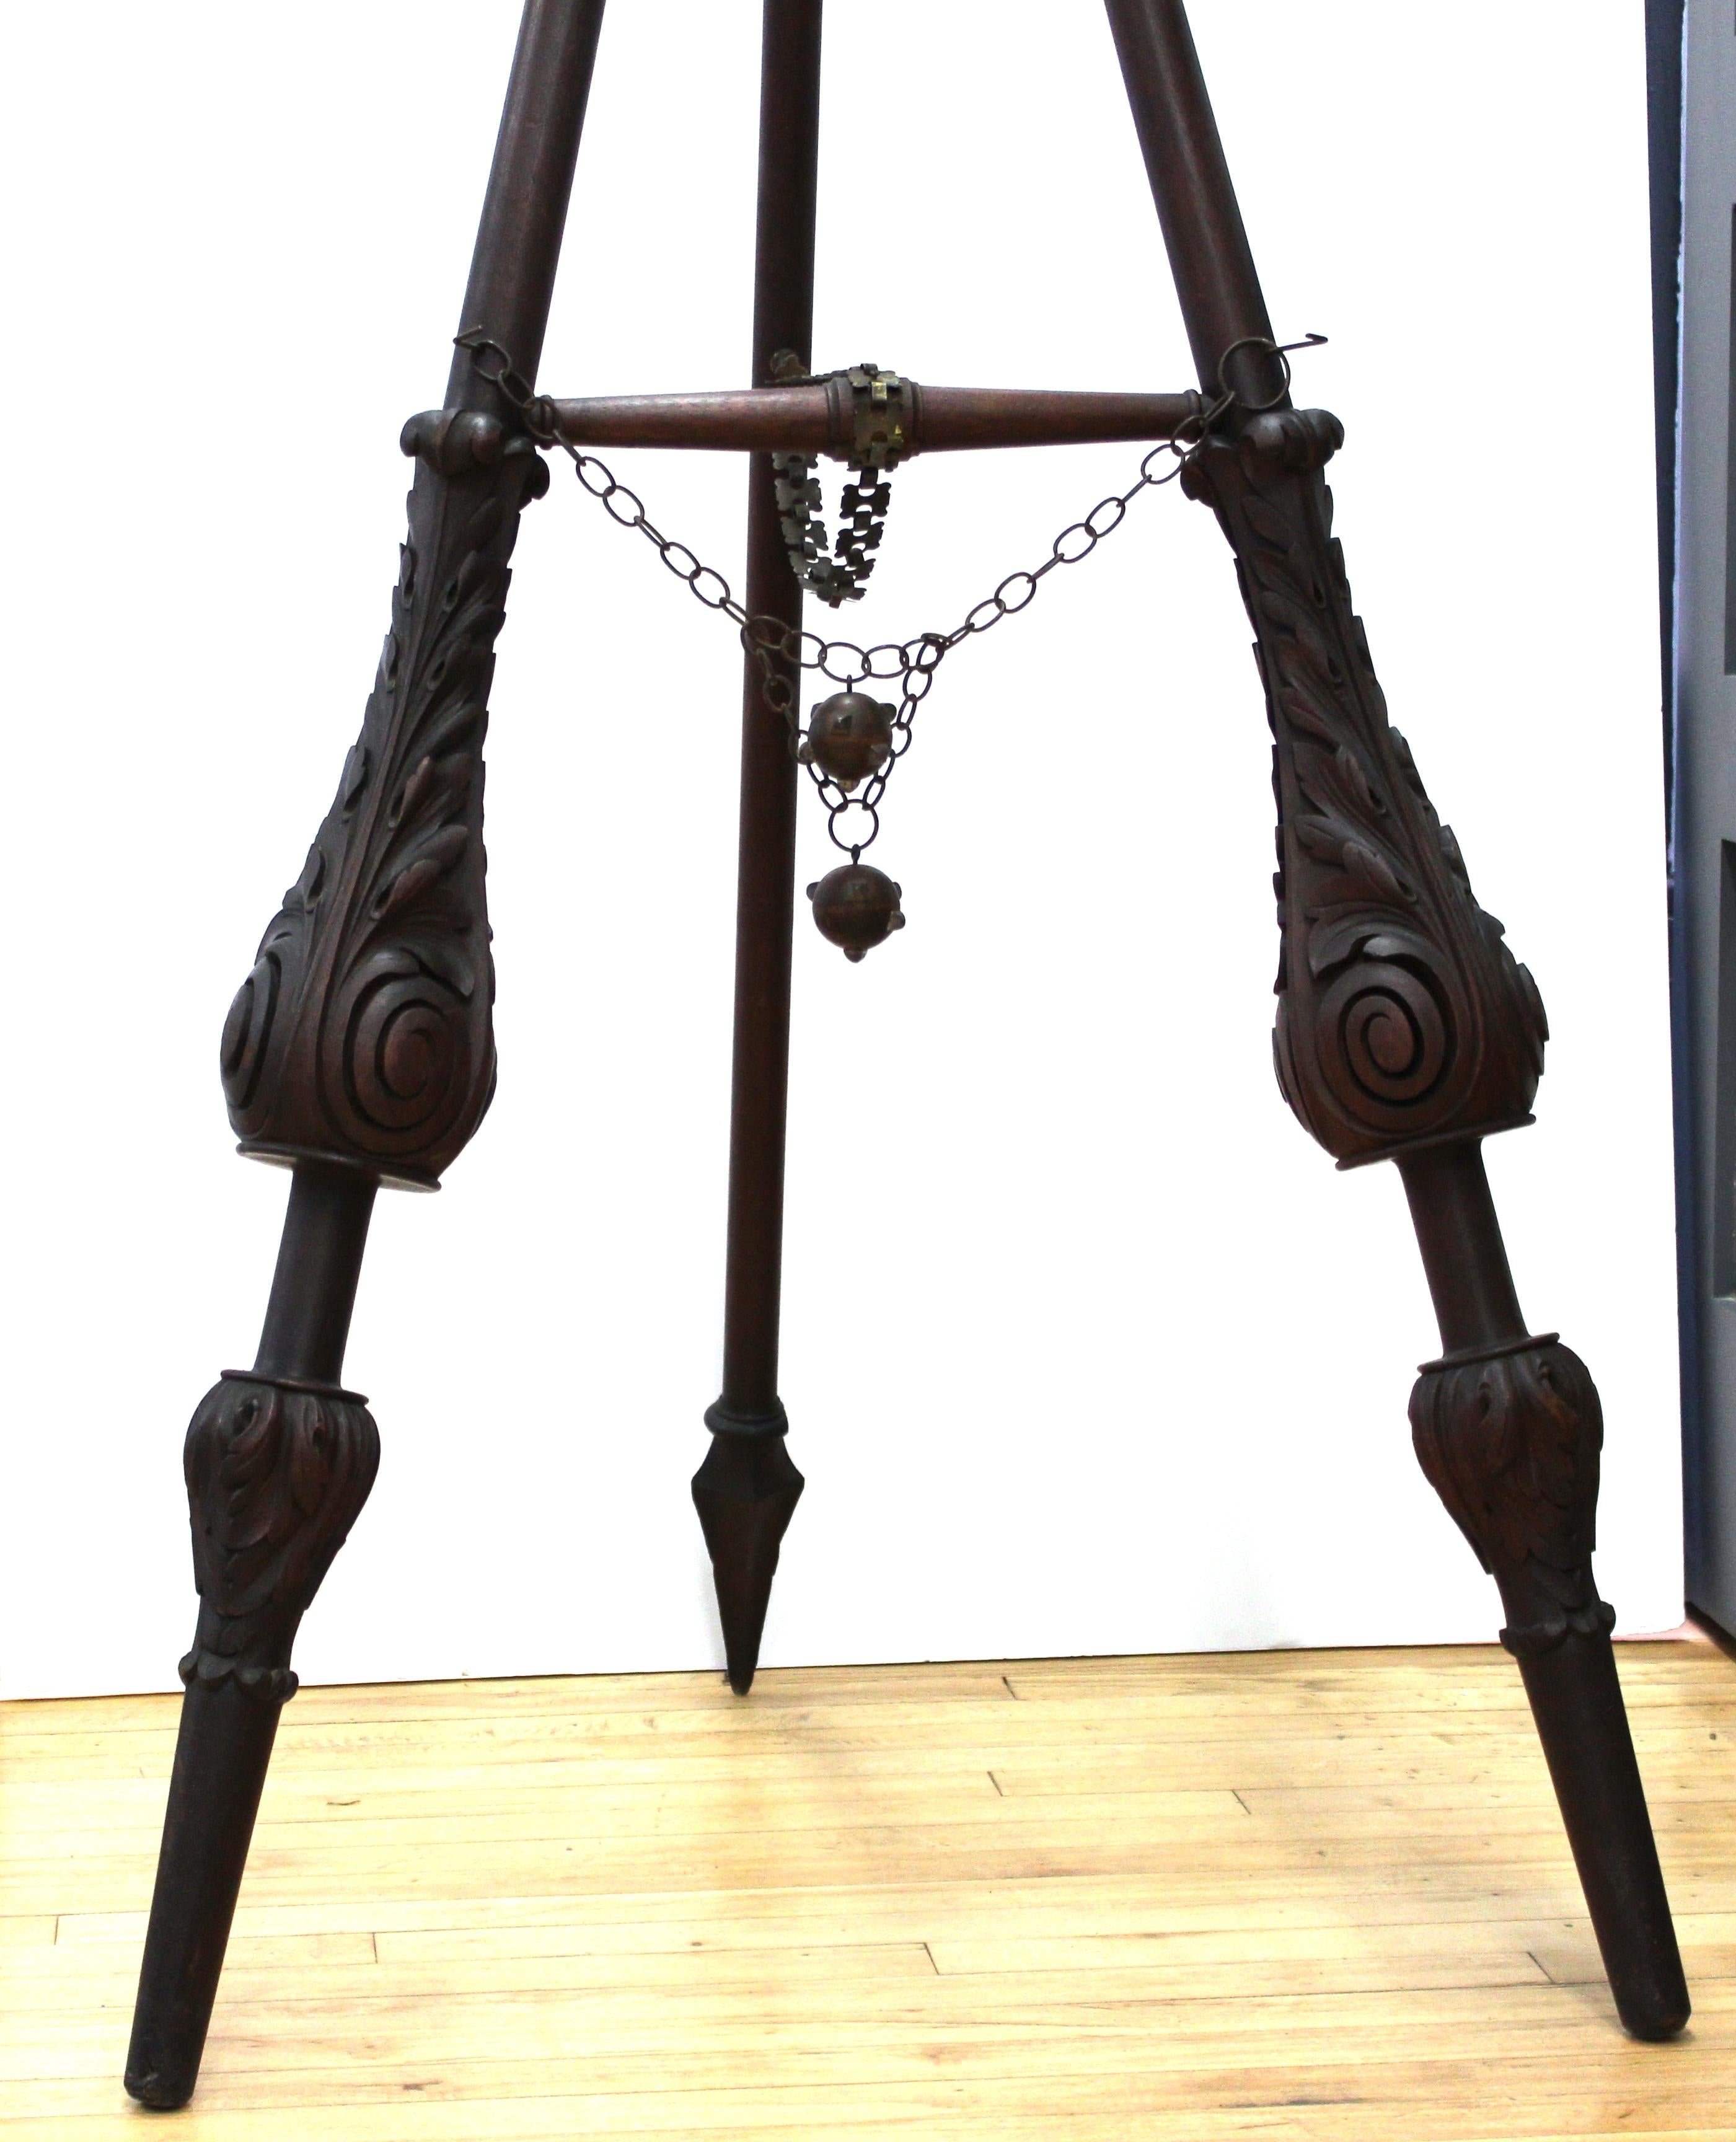 19th Century Italian Renaissance Revival Easel with Jousting Lances & Knight Helmet Finial For Sale